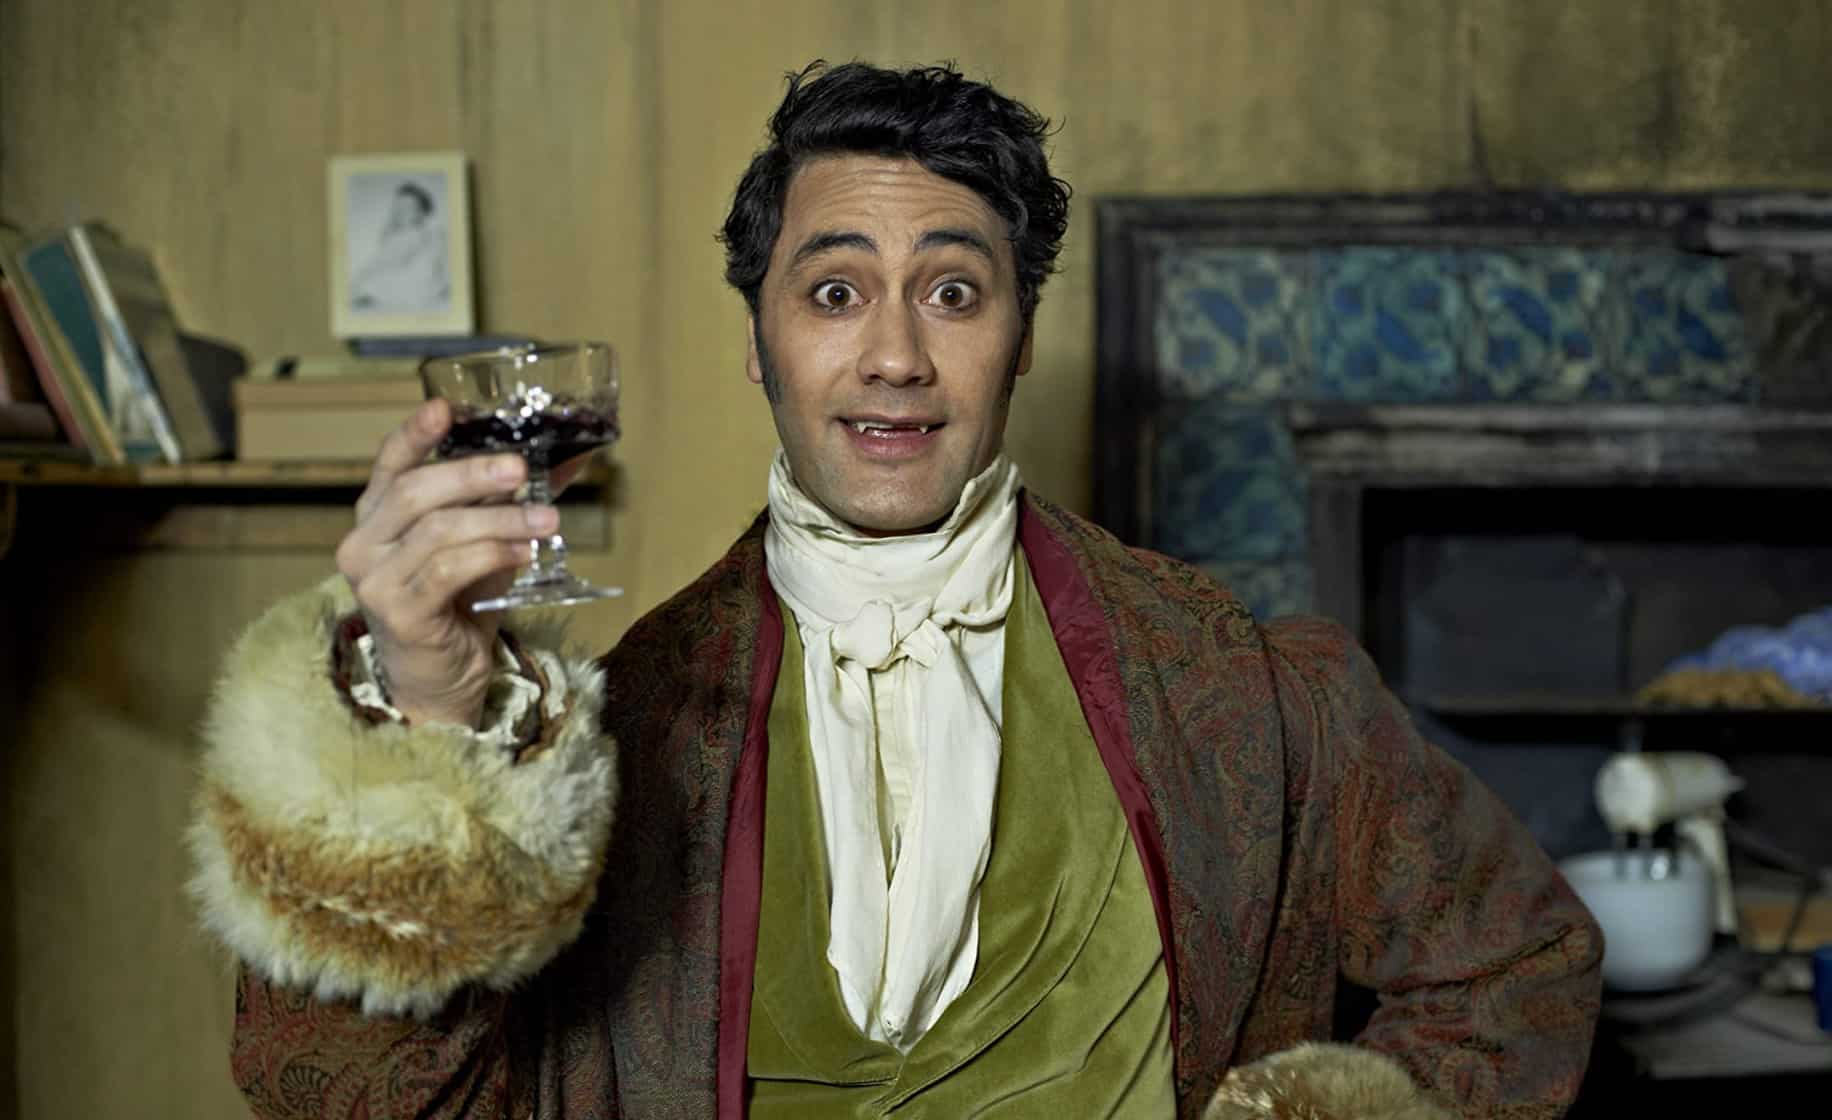 A vampire holds a goblet of blood in this image from Amazon Prime Video